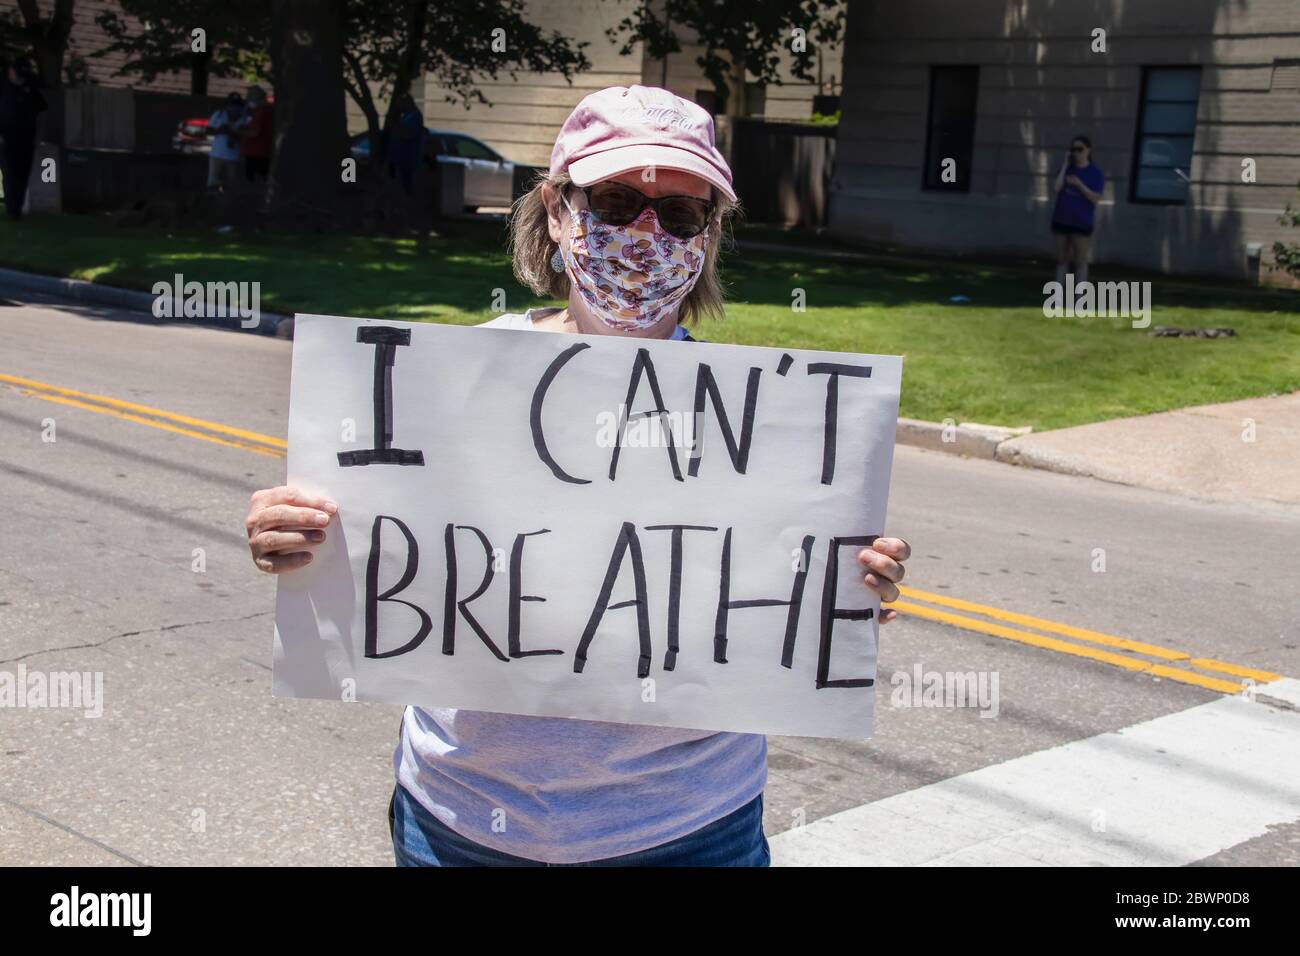 05-30-2020 Tulsa USA Woman in pink ball cap and printed mask holding sign reading I cant breathe standing in middle of road Stock Photo